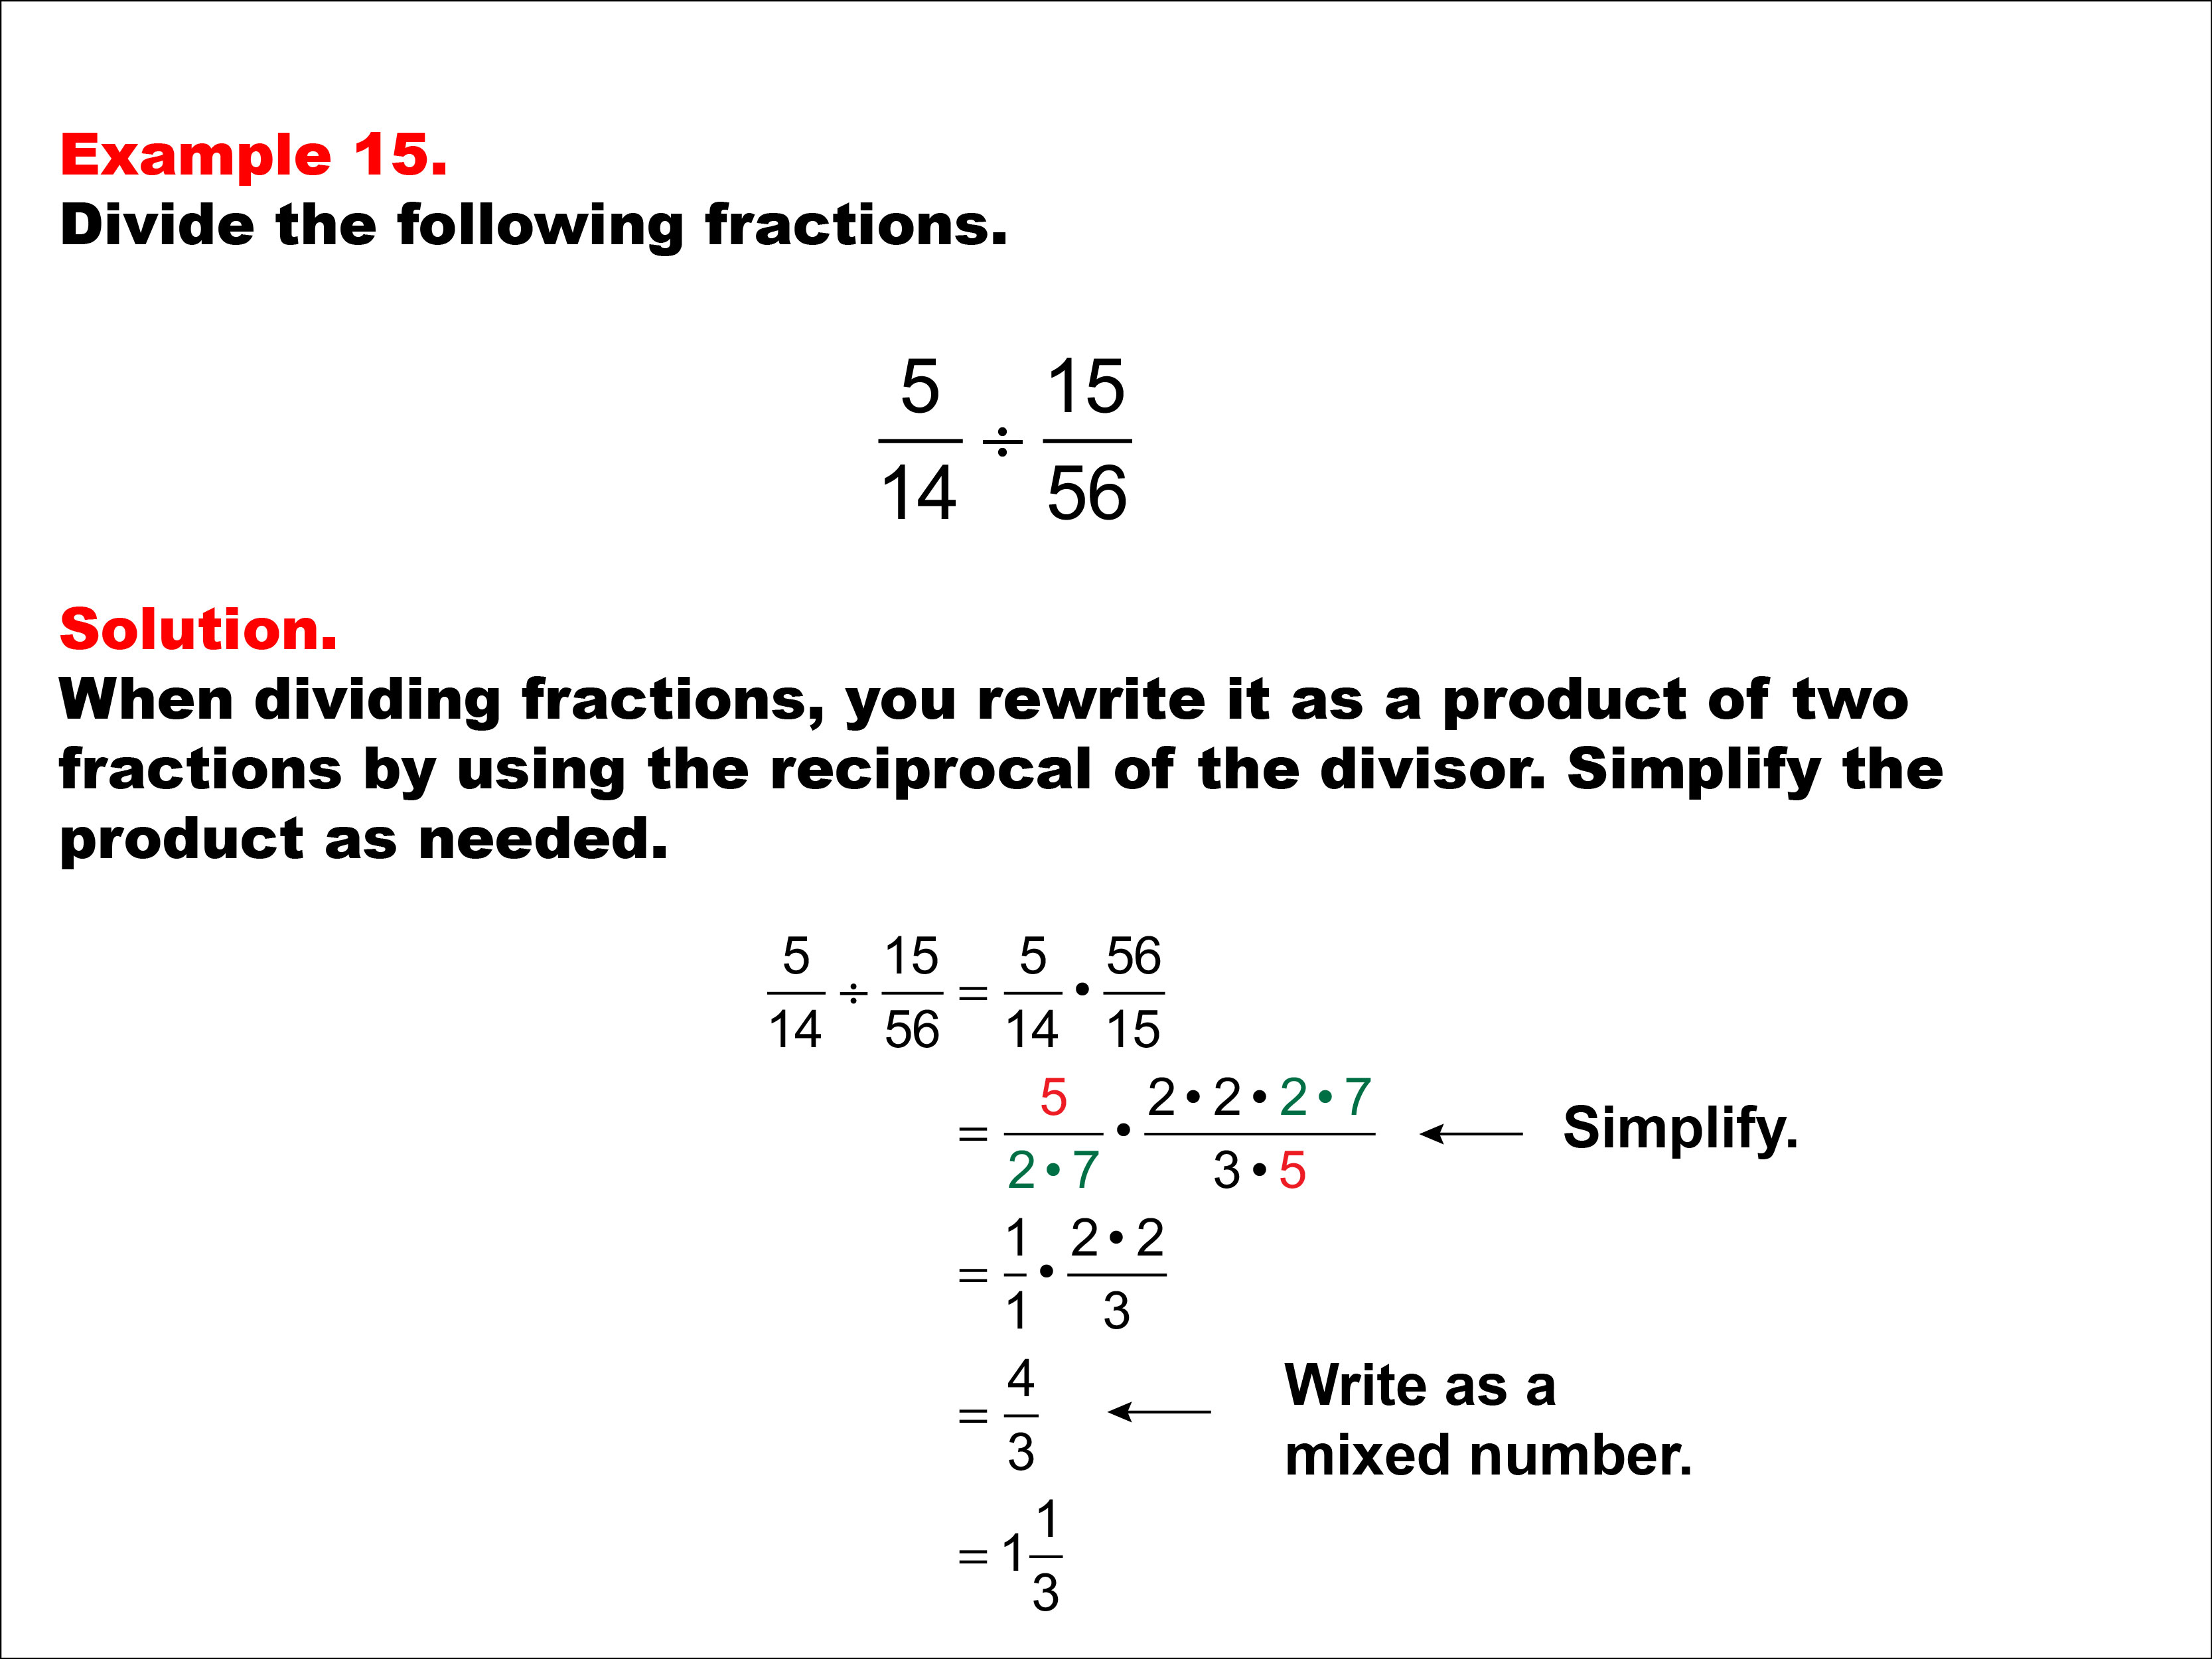 Dividing Fractions: Example 15. Dividing two fractions that results in multiplying two fractions with different denominators. The product is written as a mixed number.